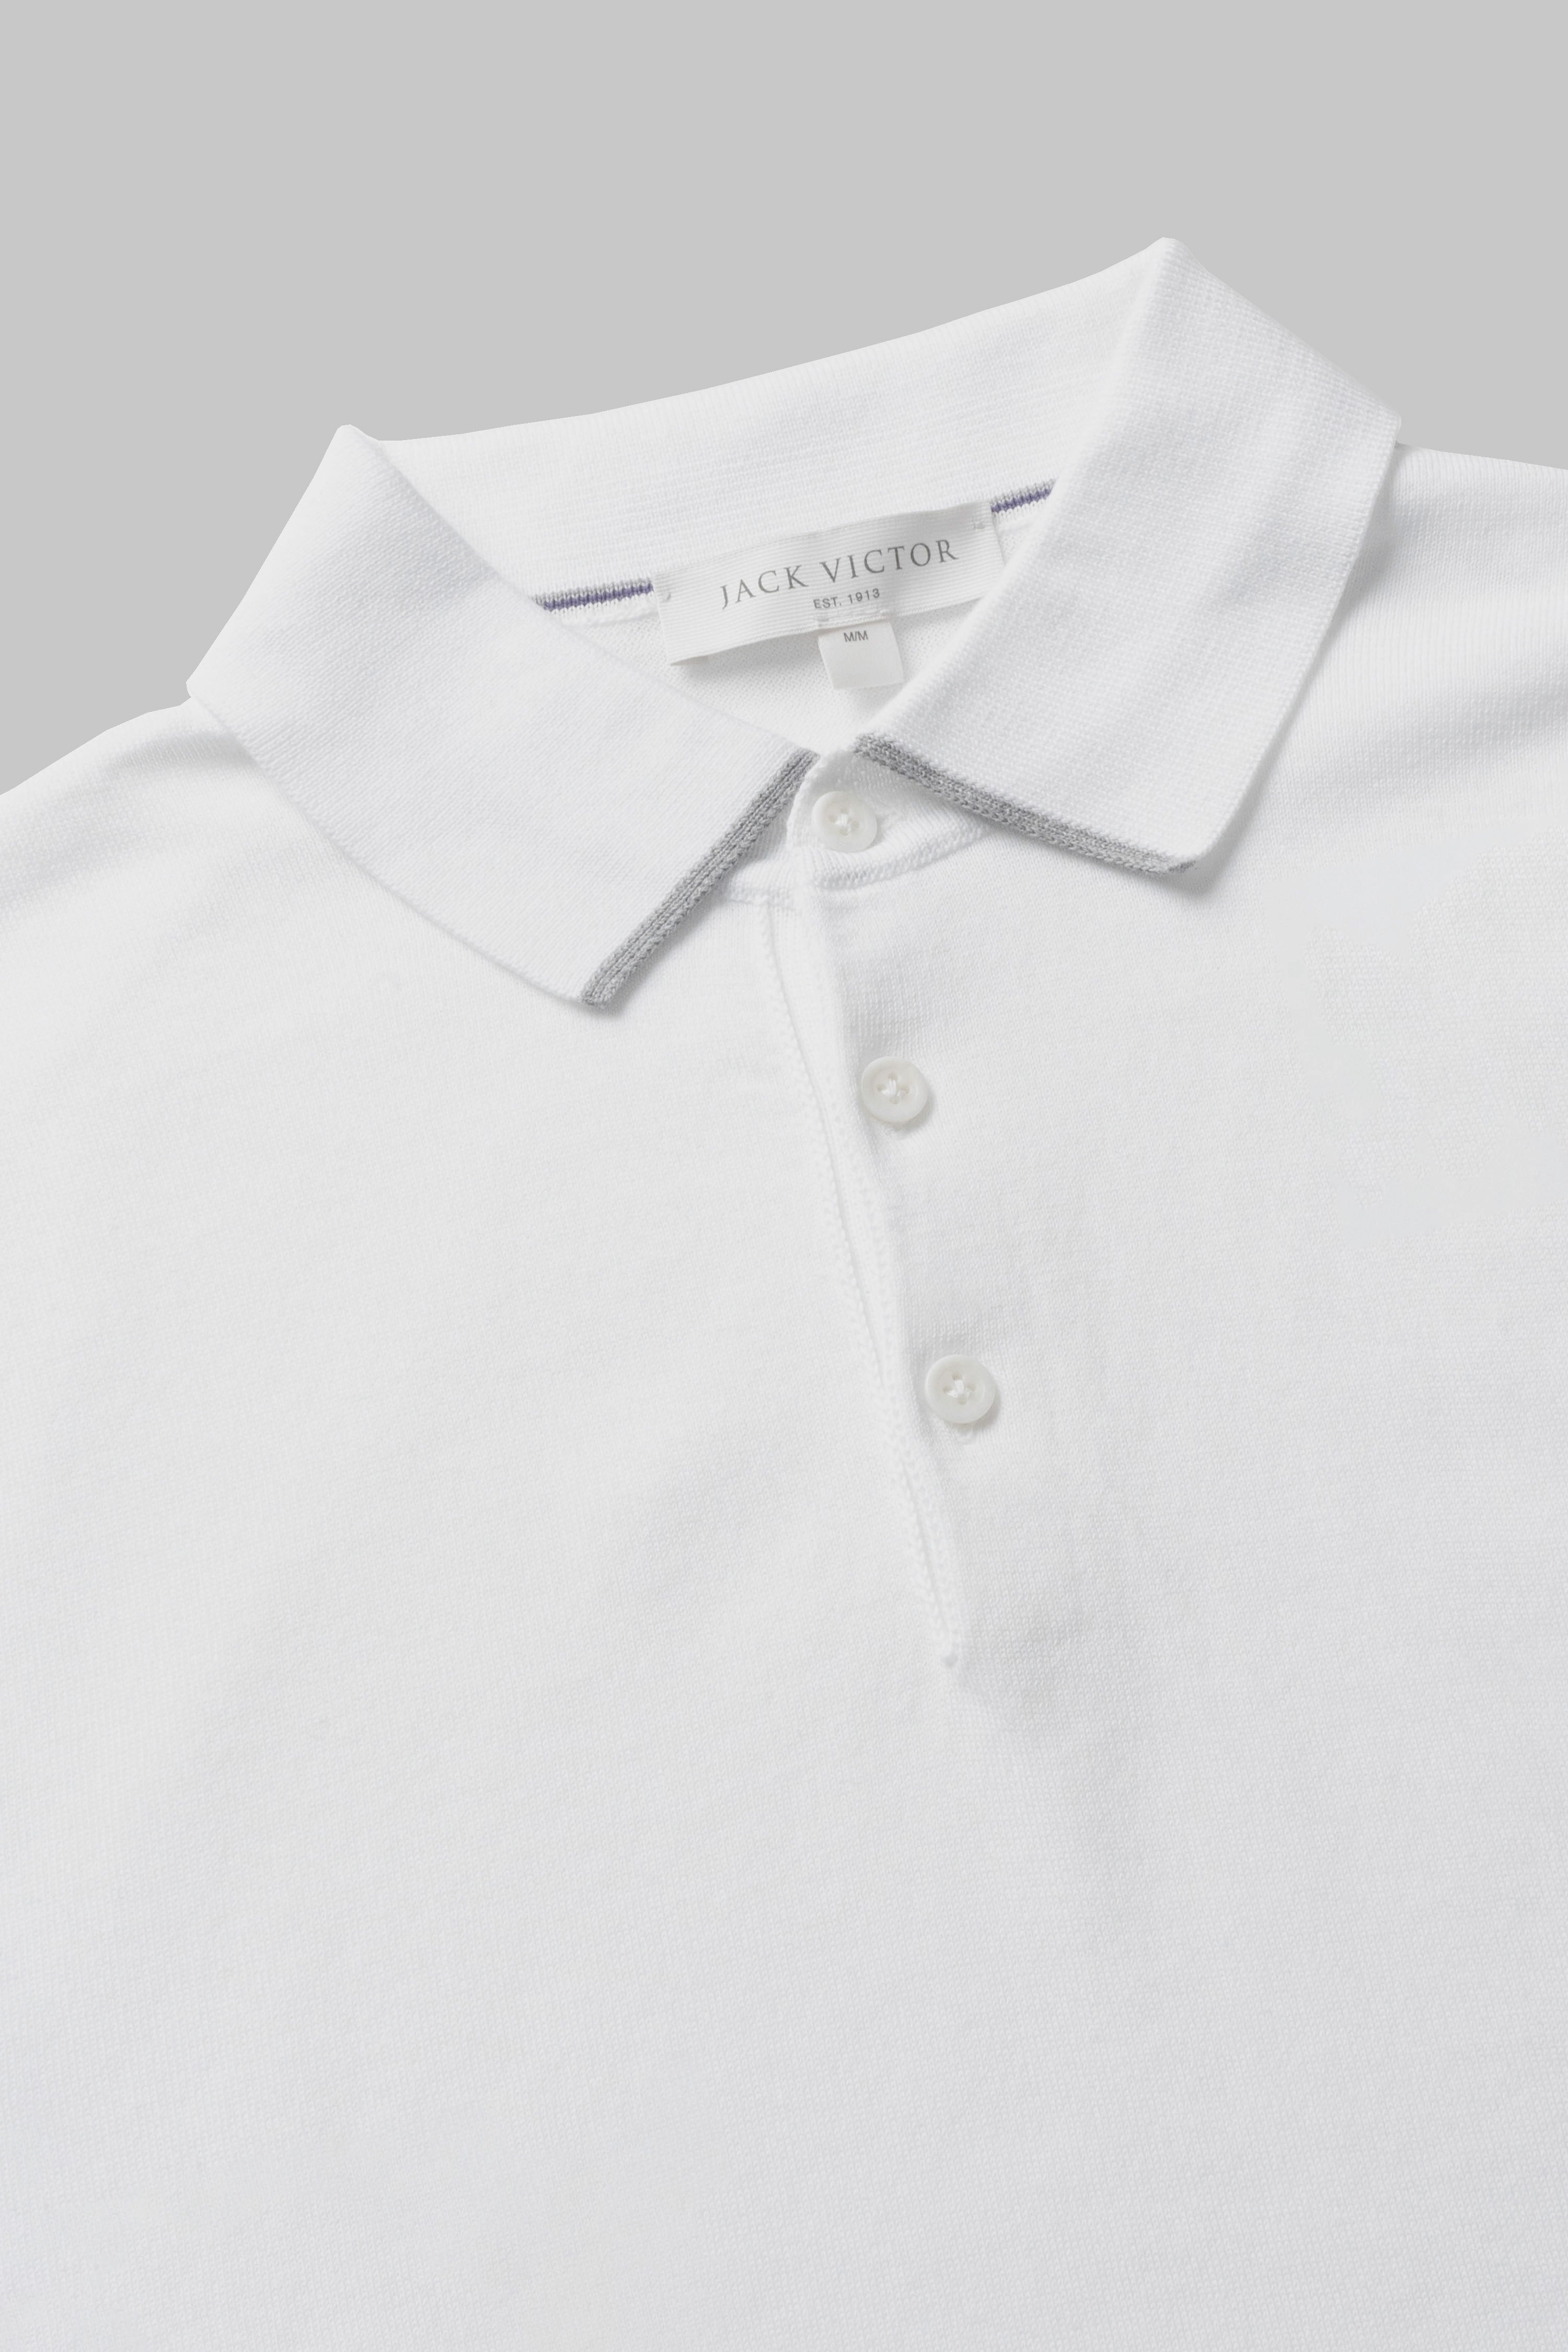 Image of Roslyn Cotton Knit Polo in White-Jack Victor